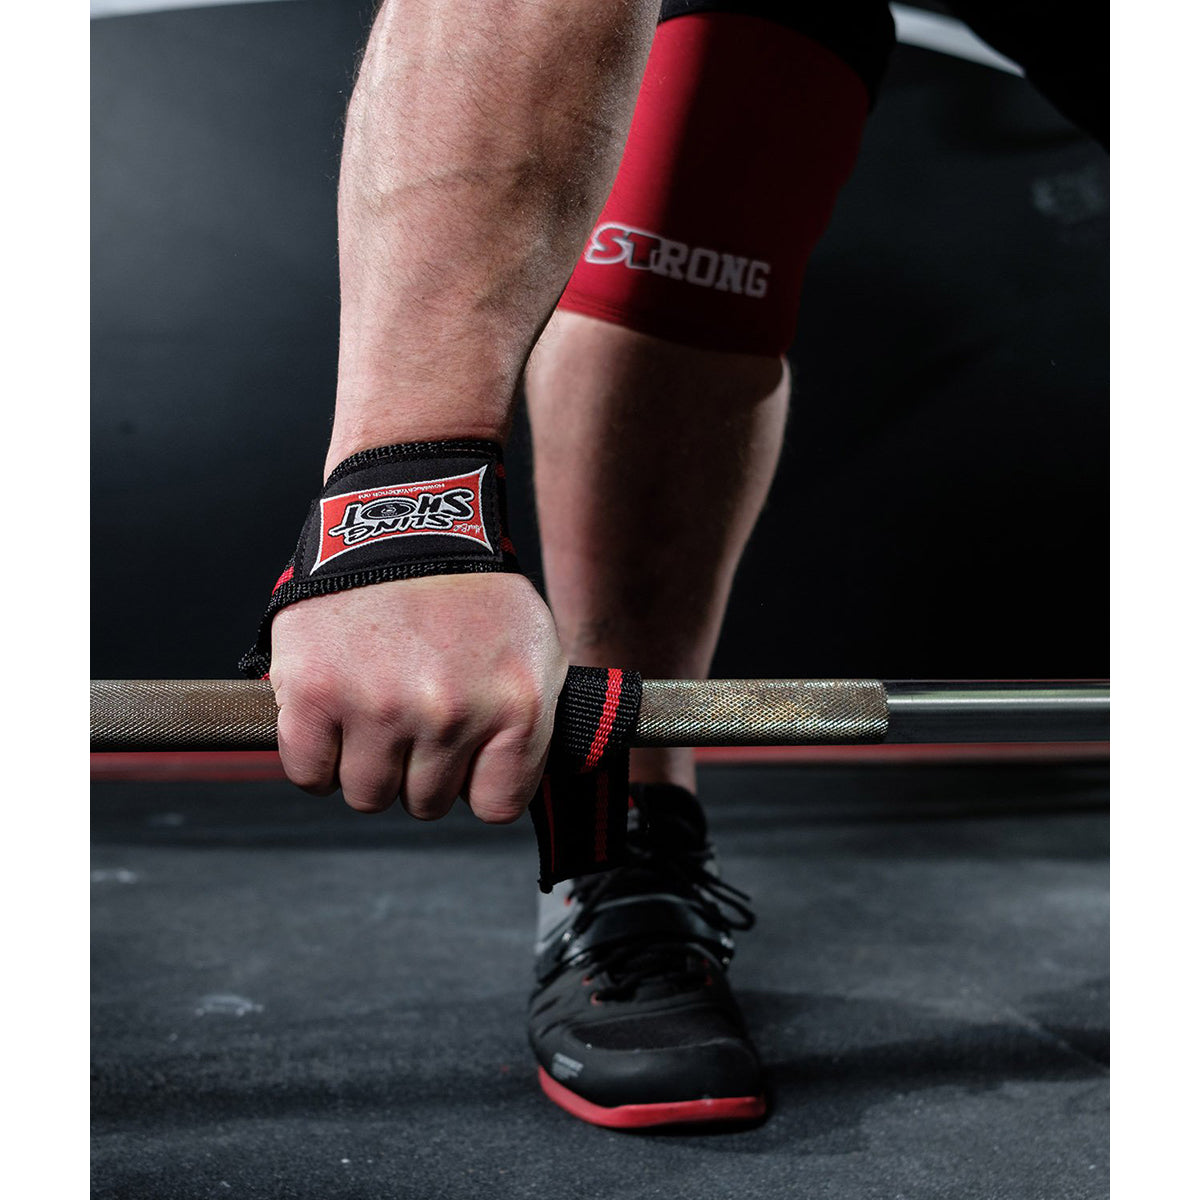 Sling Shot Super Heavy Duty Weight Lifting Straps by Mark Bell Sling Shot